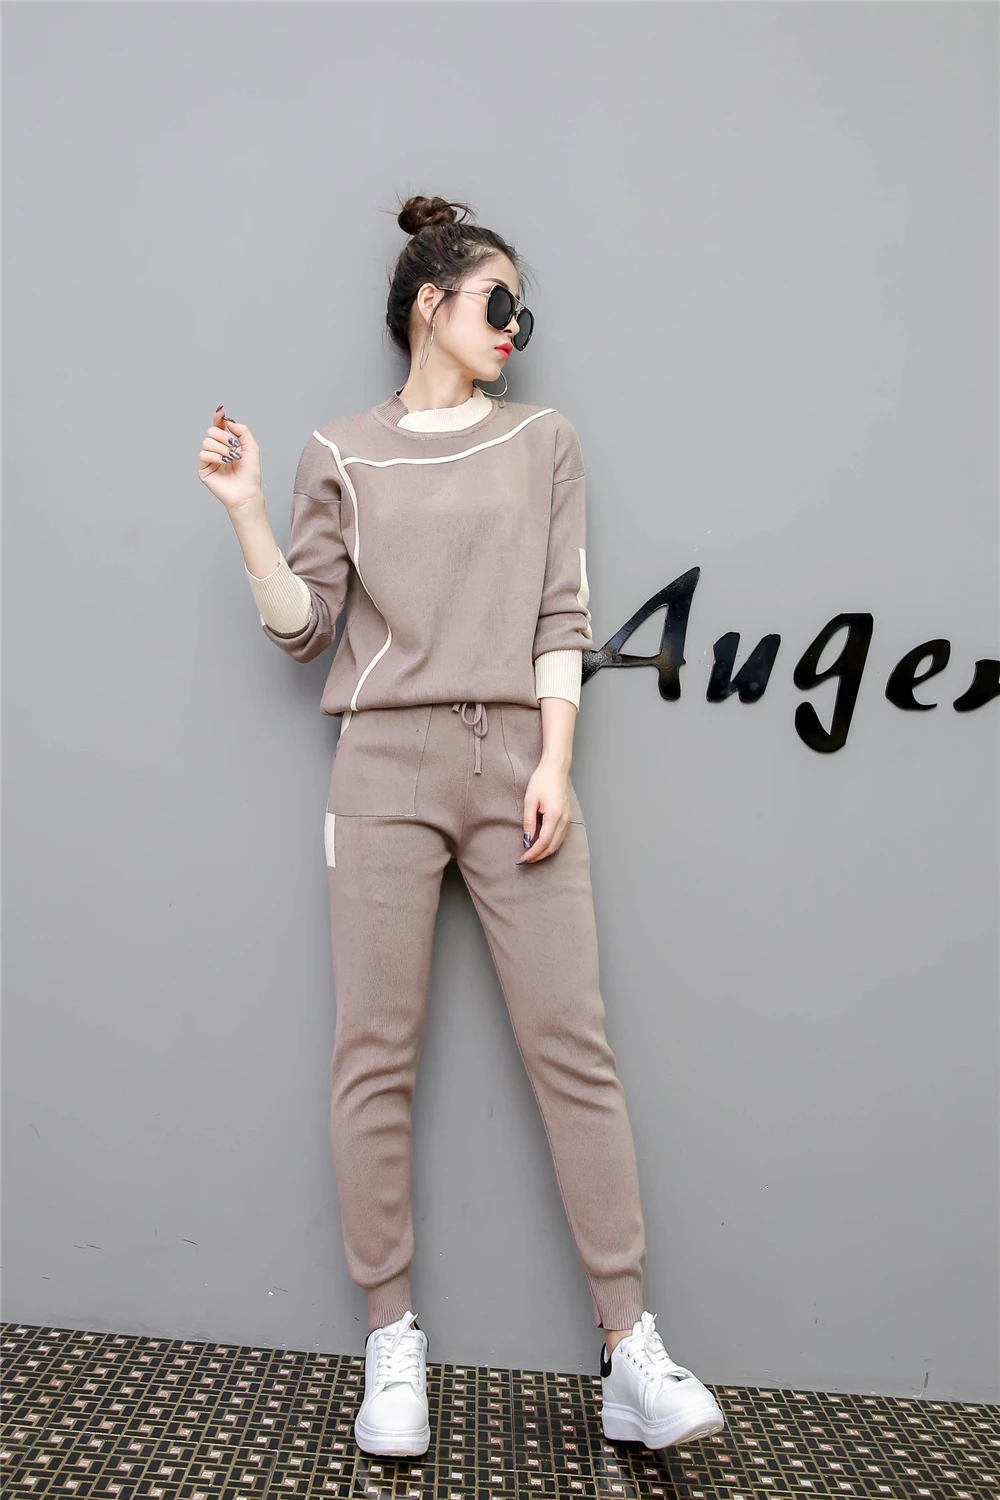 DEAT Autumn Women Knitted Two Piece Set Casual Sportsuit O Neck Long Sleeve Pullover Sweater Pants Set Tracksuit MG987